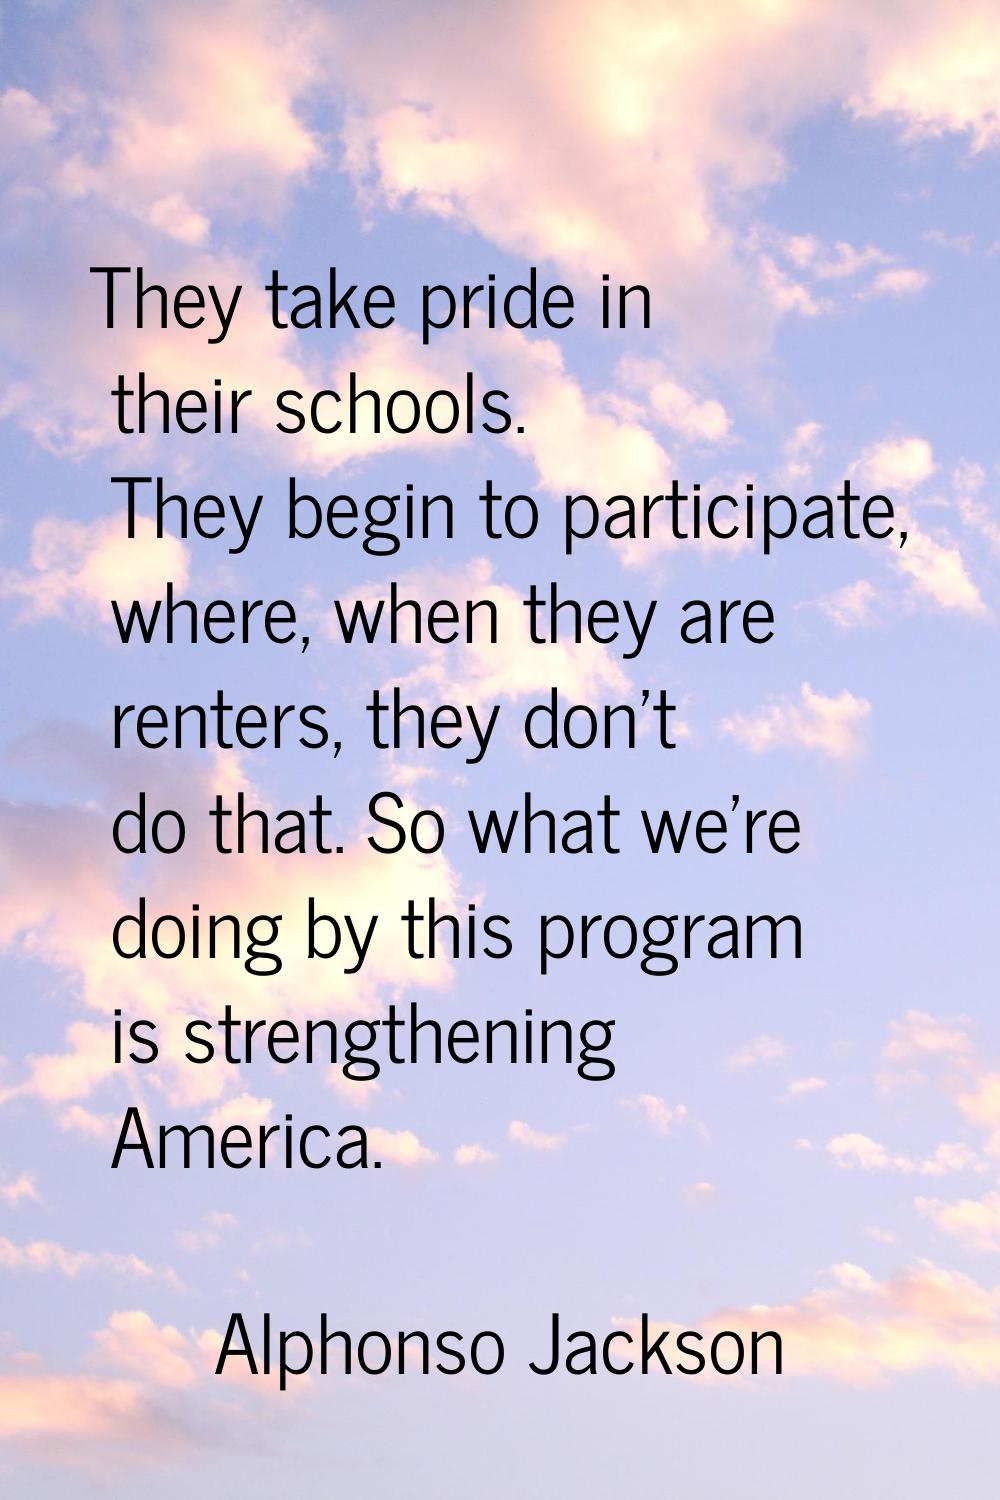 They take pride in their schools. They begin to participate, where, when they are renters, they don